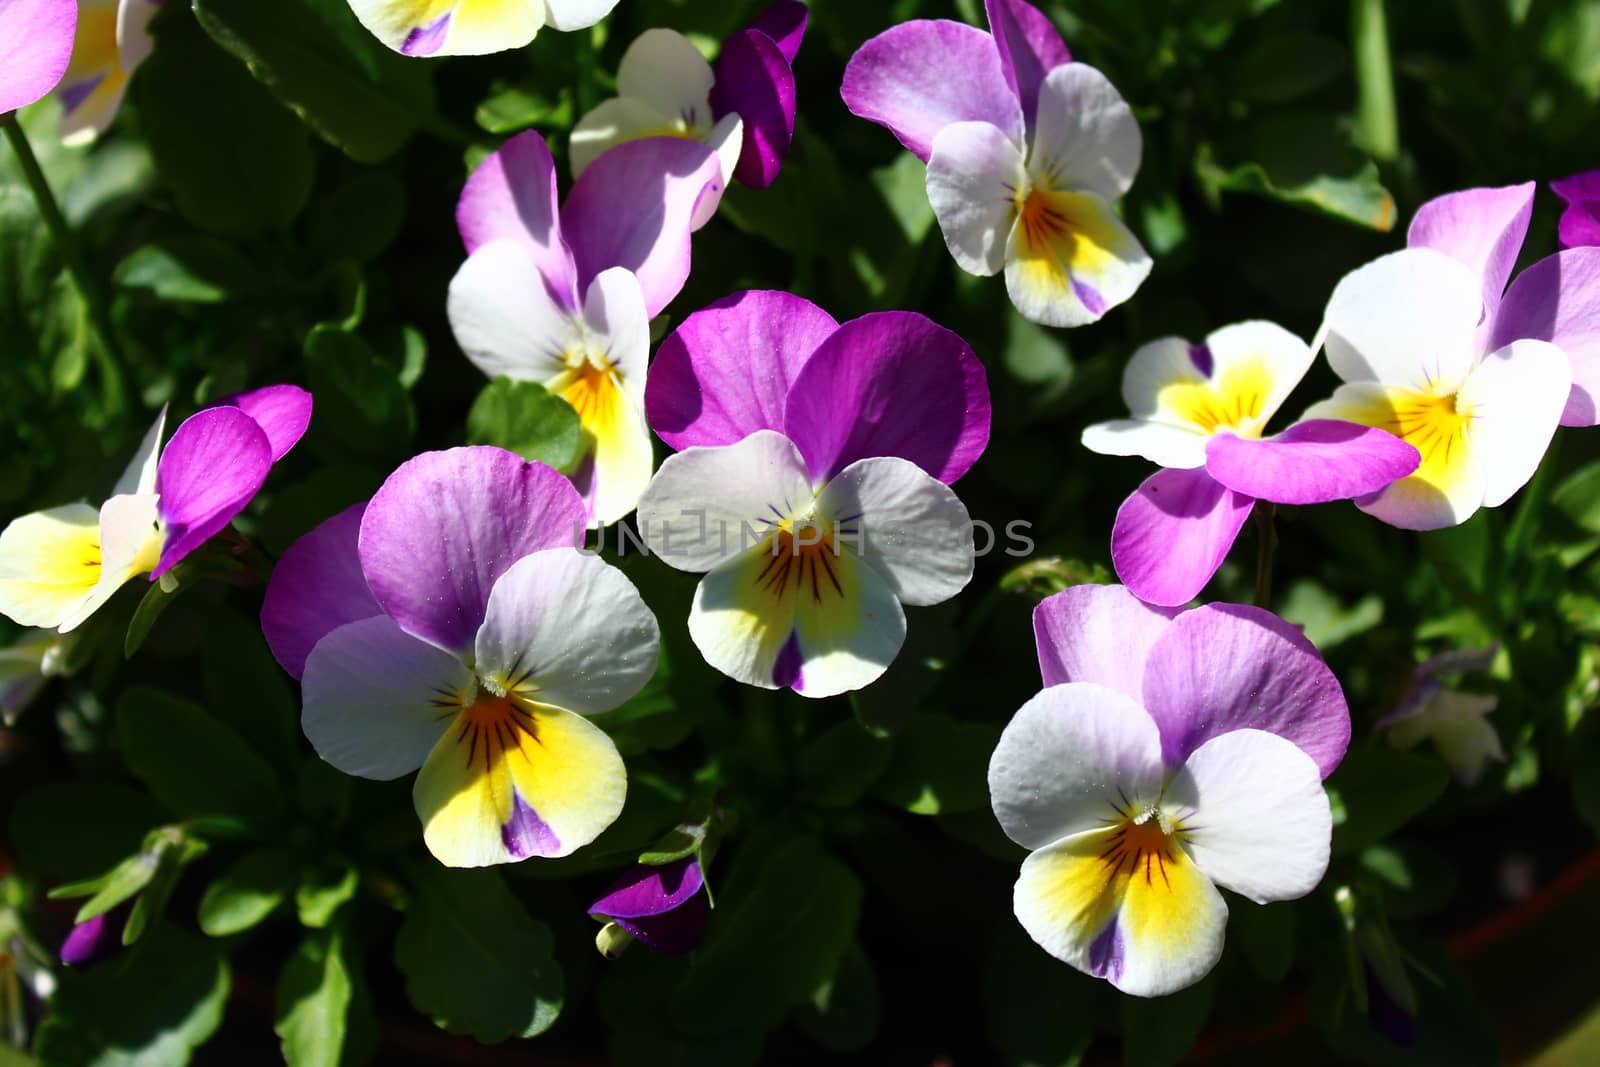 The picture shows pansy in the garden.